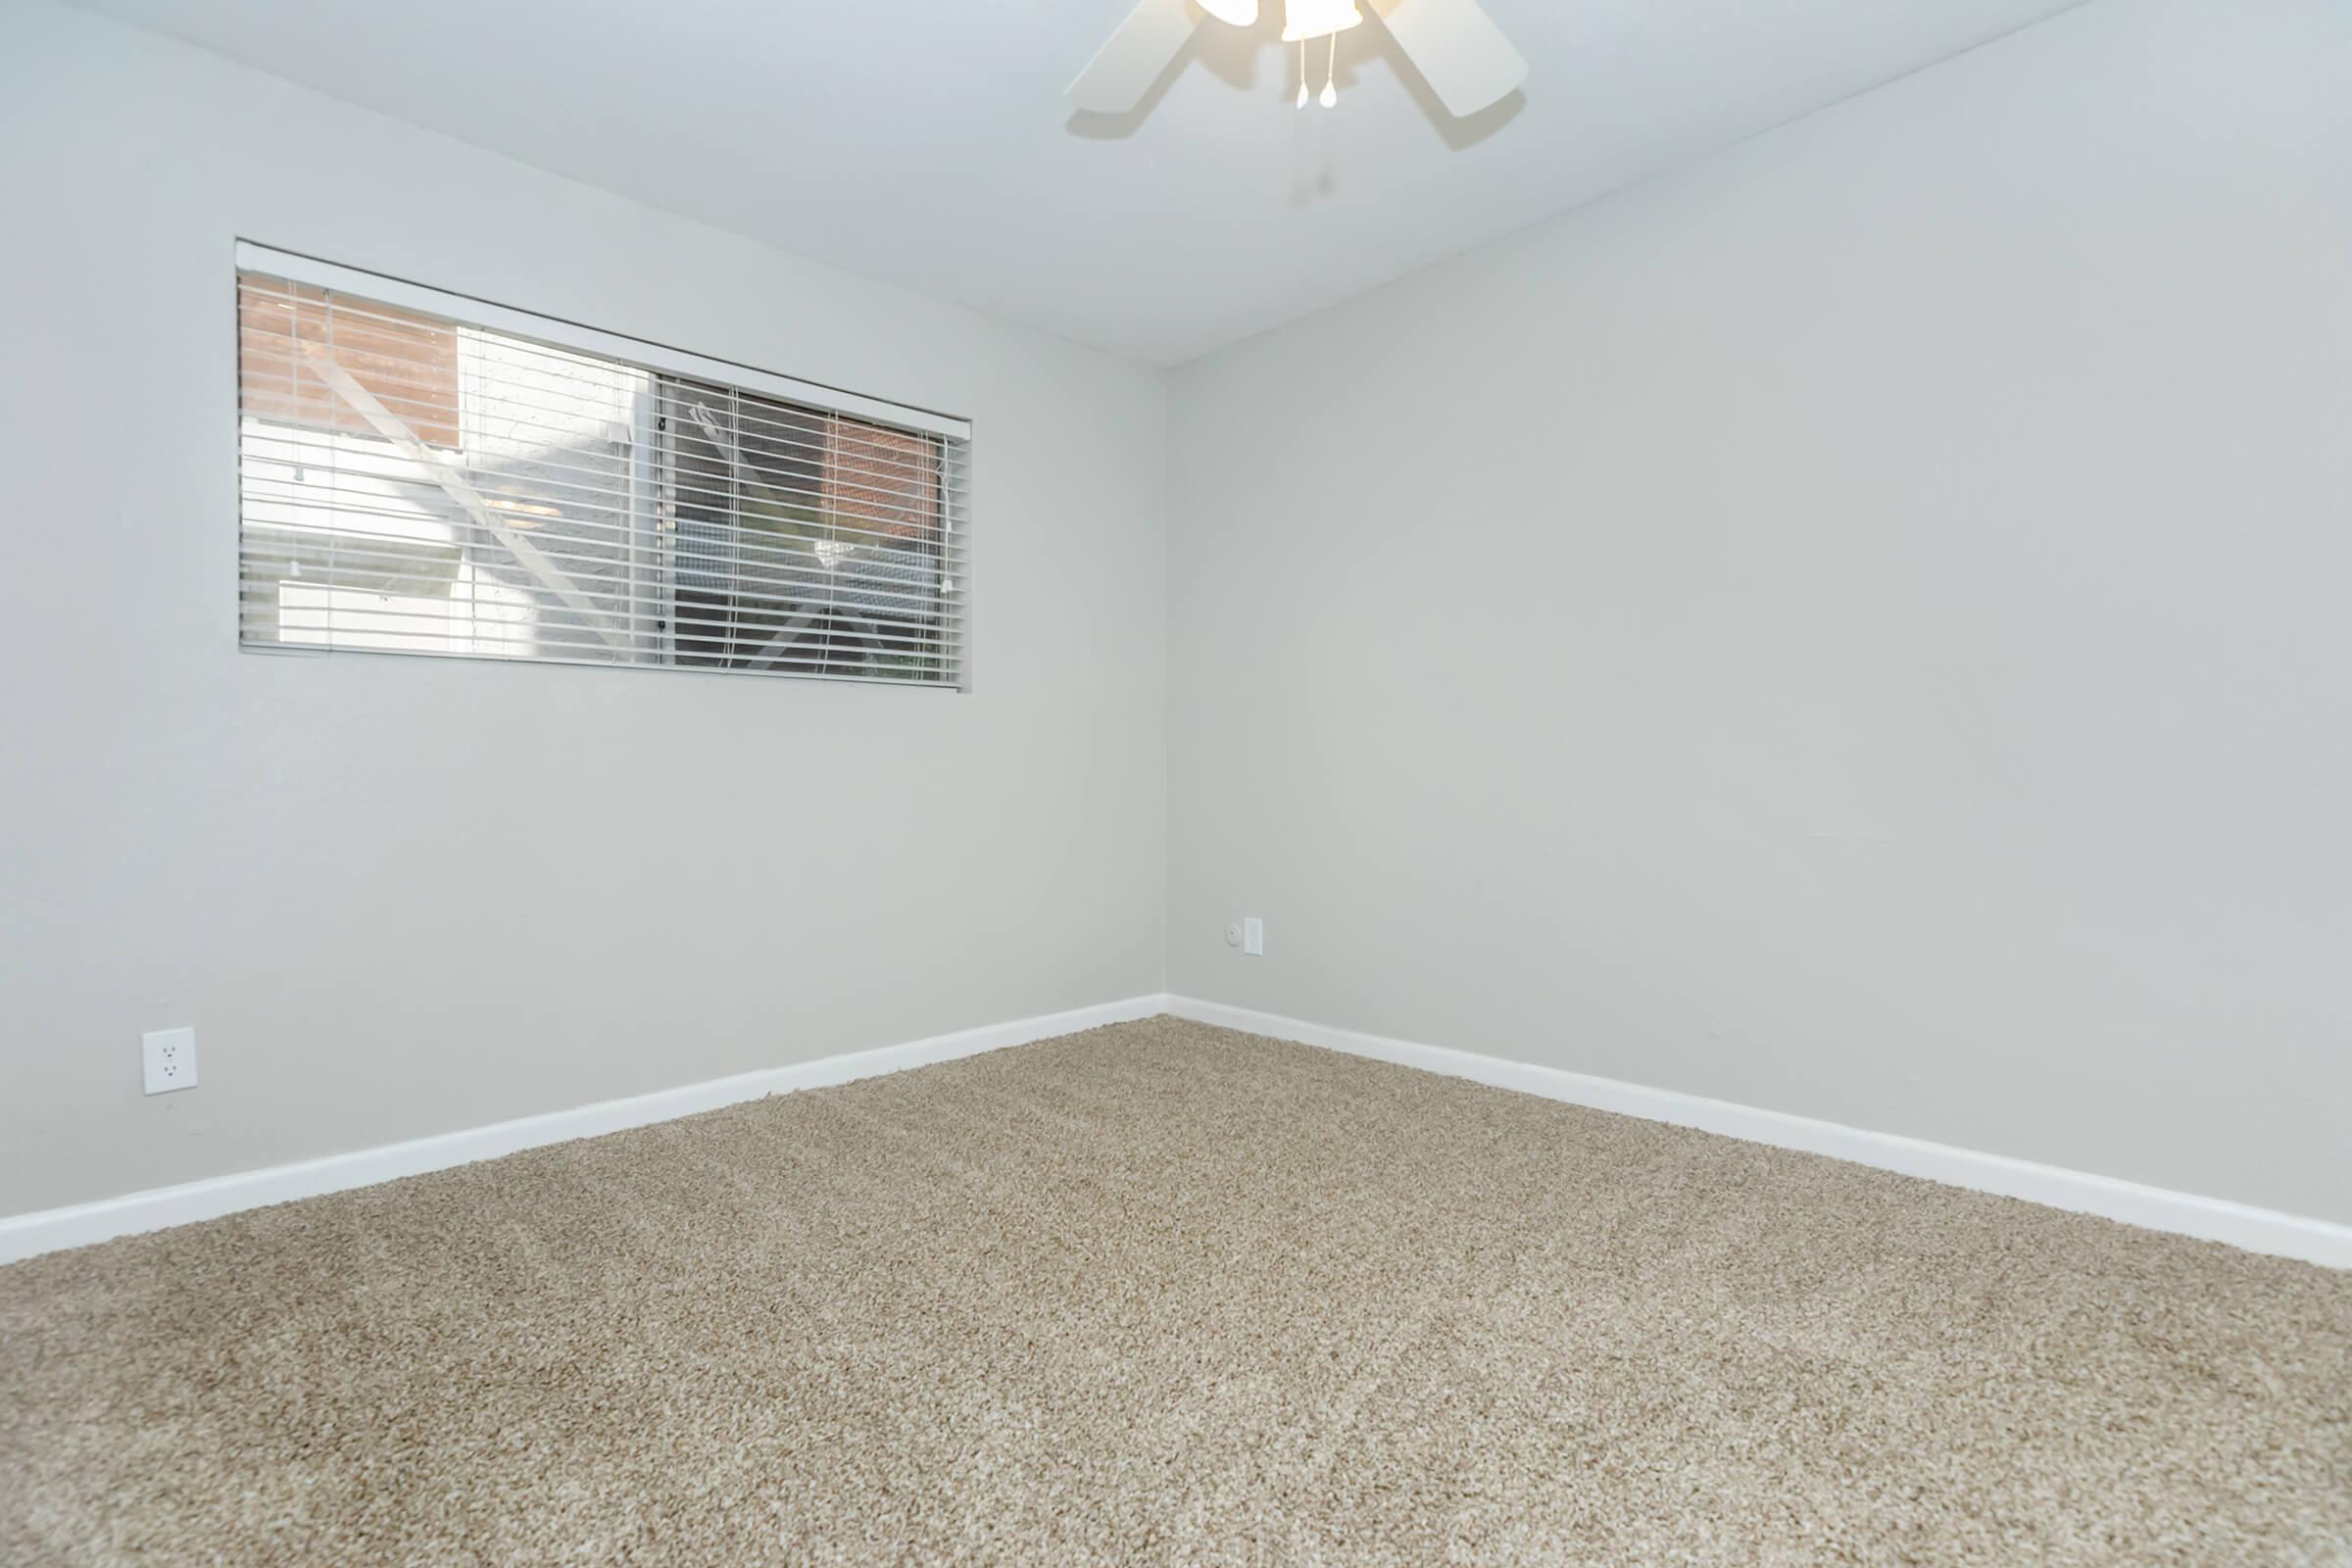 PLUSH CARPETING AND CEILING FAN IN BEDROOM